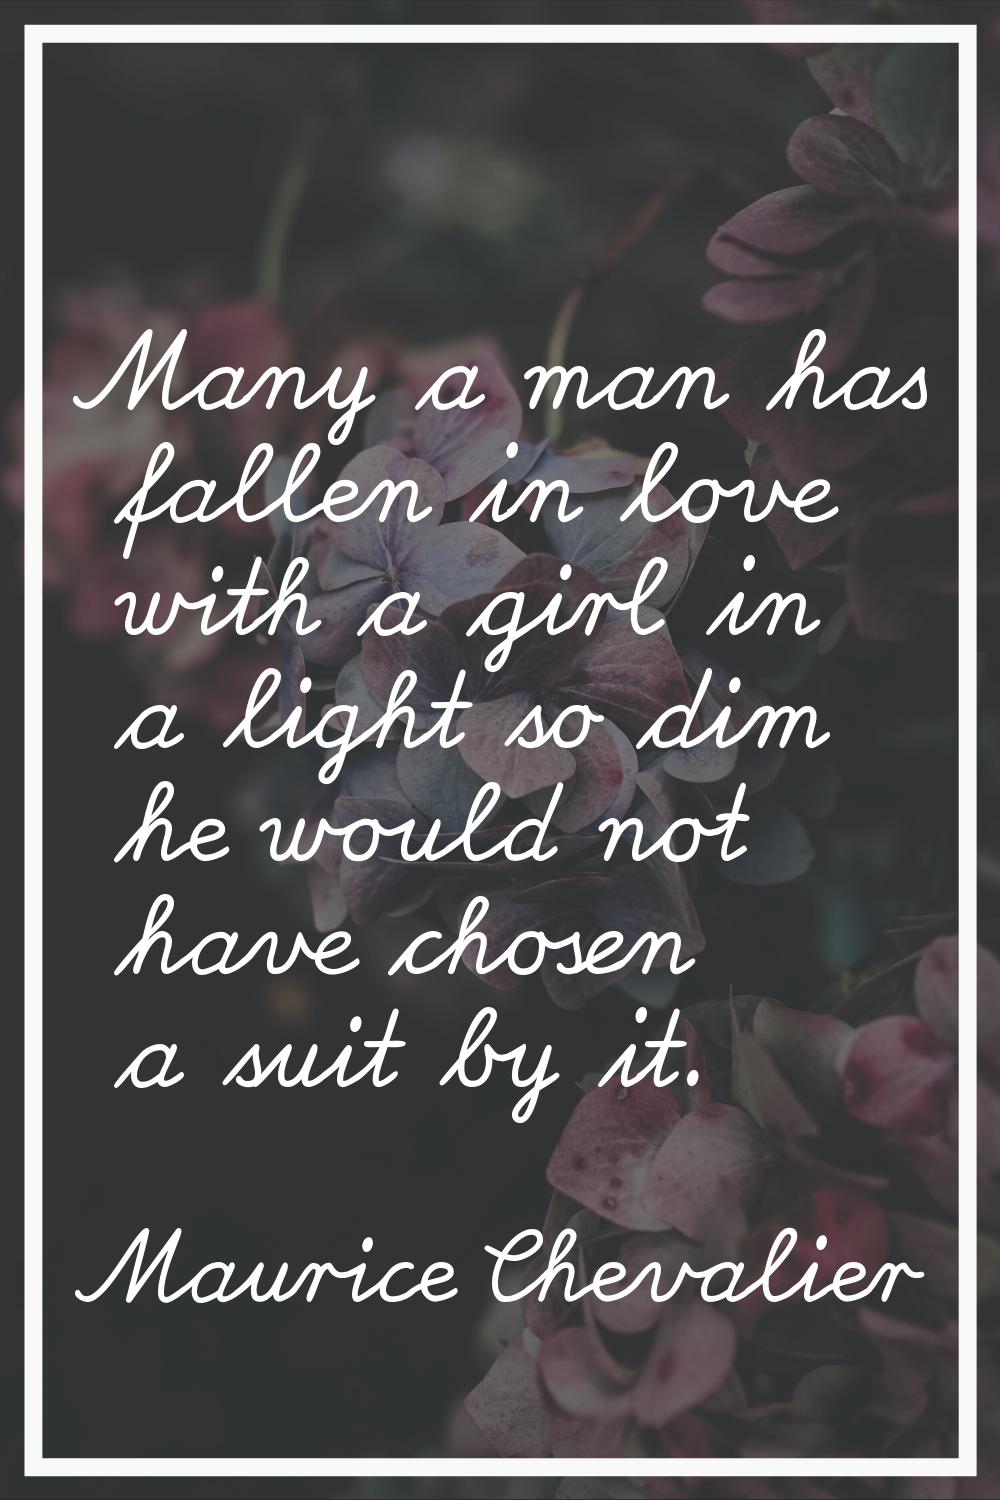 Many a man has fallen in love with a girl in a light so dim he would not have chosen a suit by it.